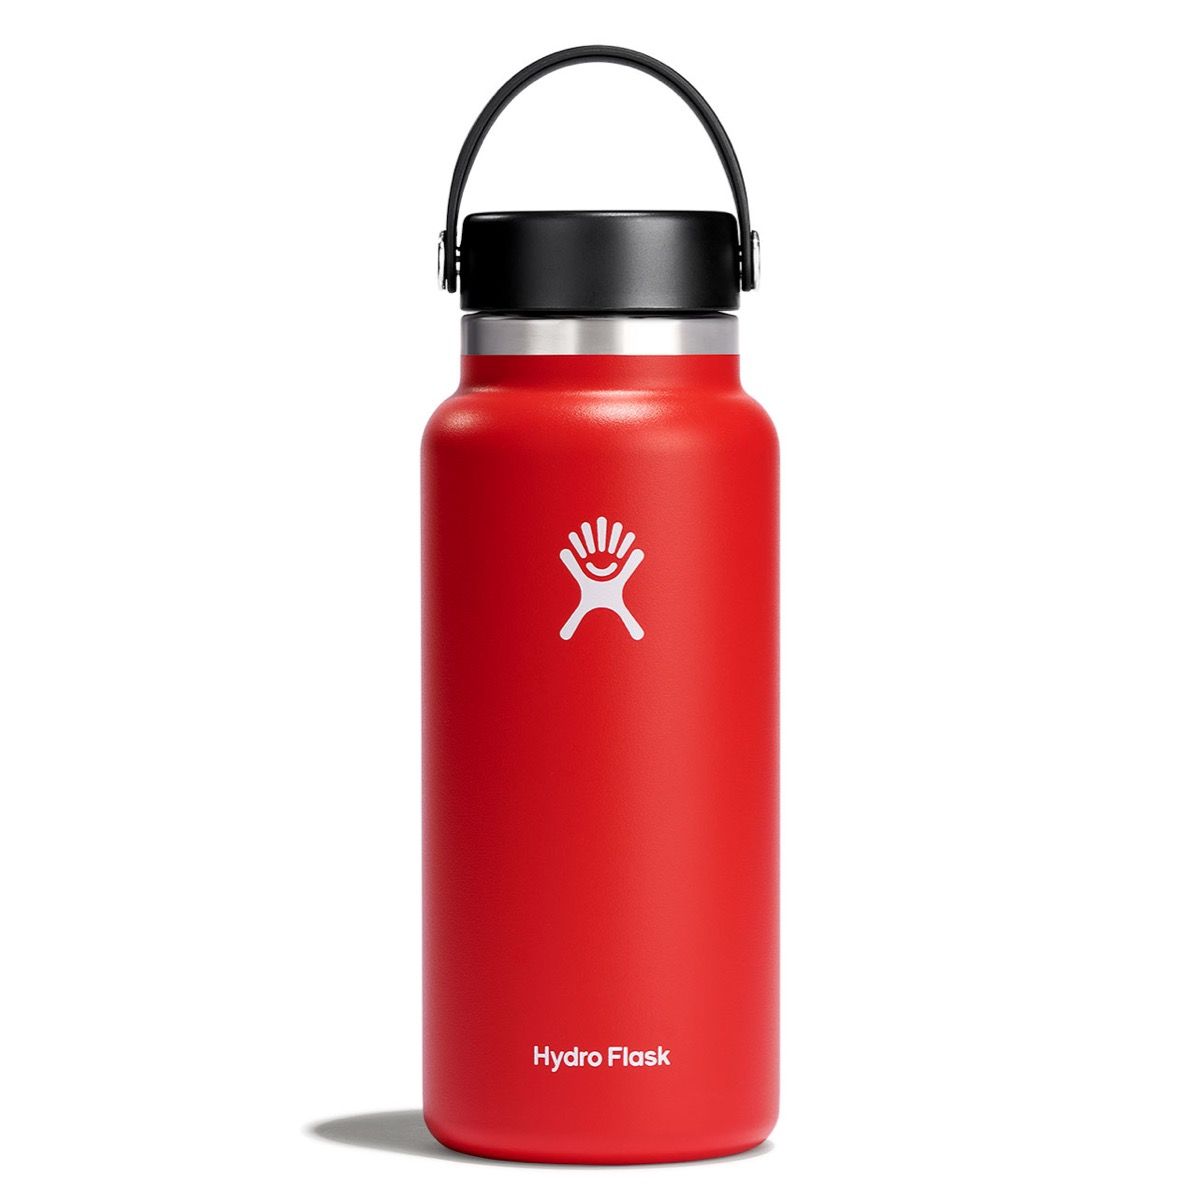 HYDRO FLASK 32 oz Wide Mouth With Straw Lid Water Bottle - STONE